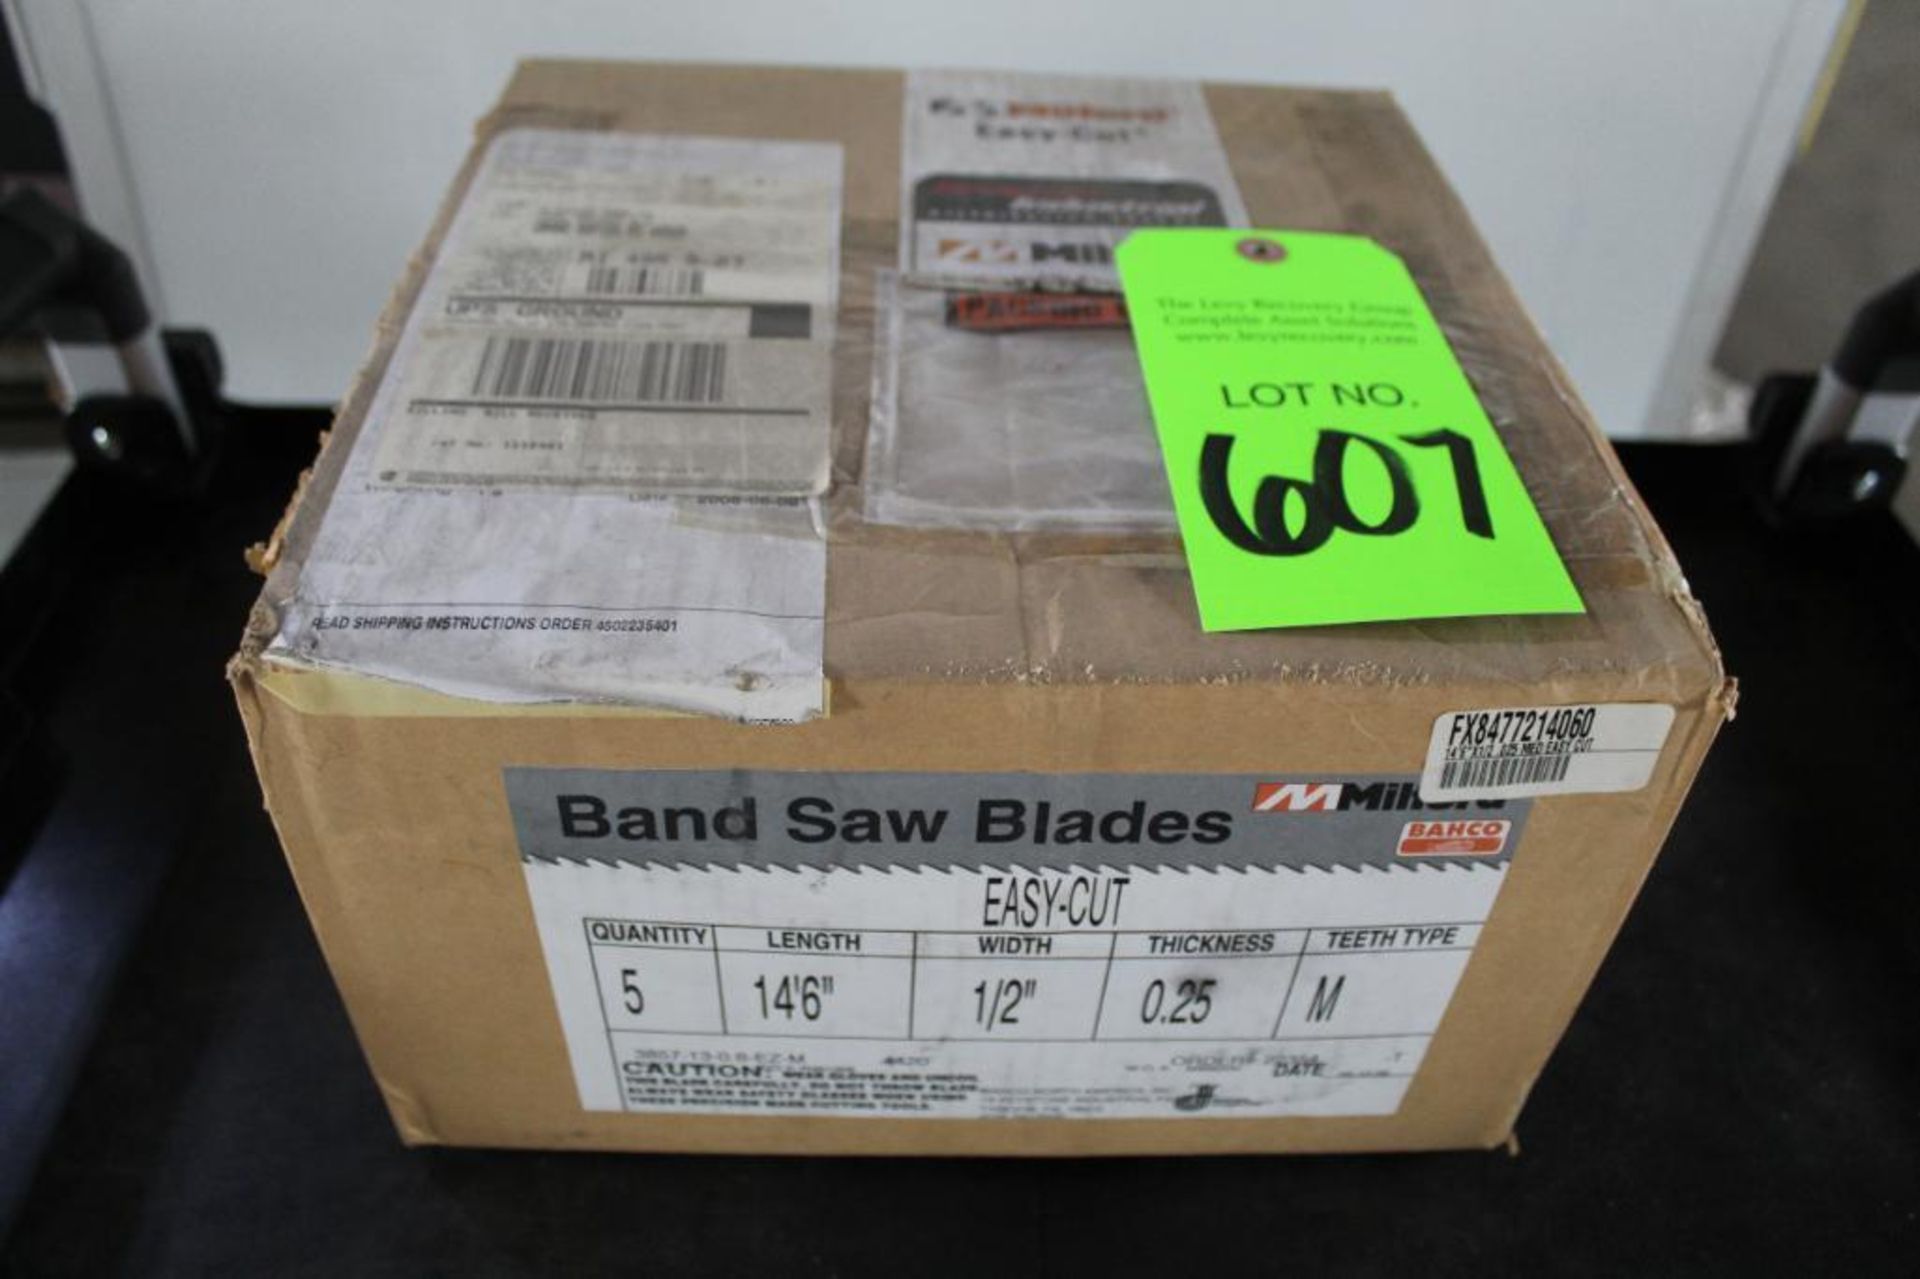 Lot of (5) Snap On Distribution Milford Easy Cut Blandsaw Blades 14'6" - Image 2 of 5